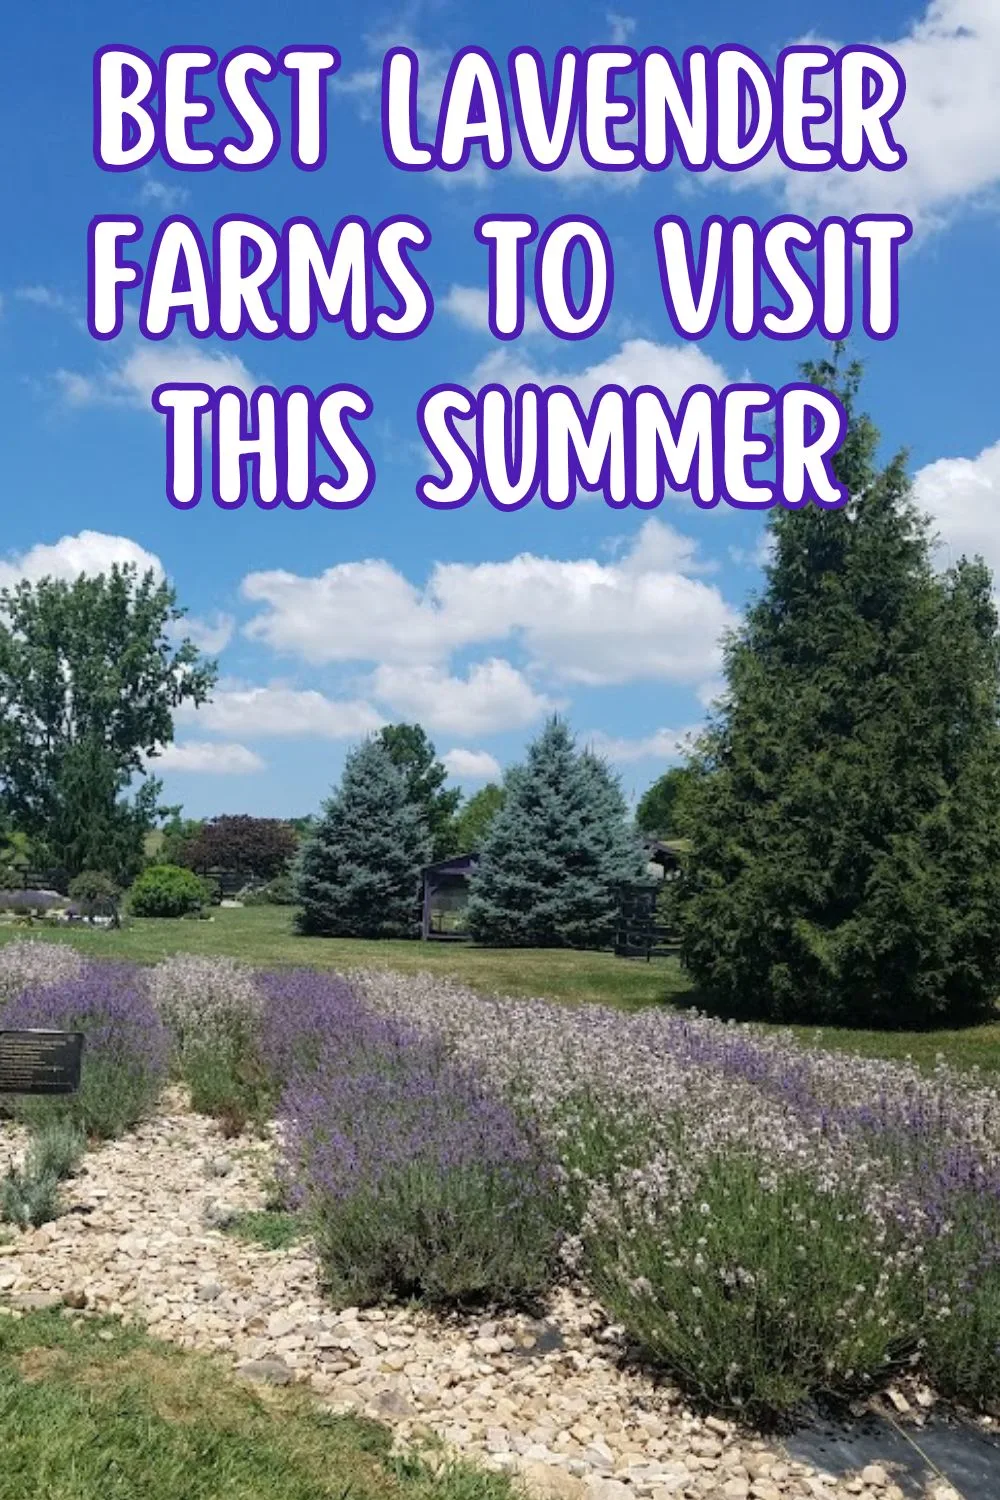 Best lavender farms to visit this summer.